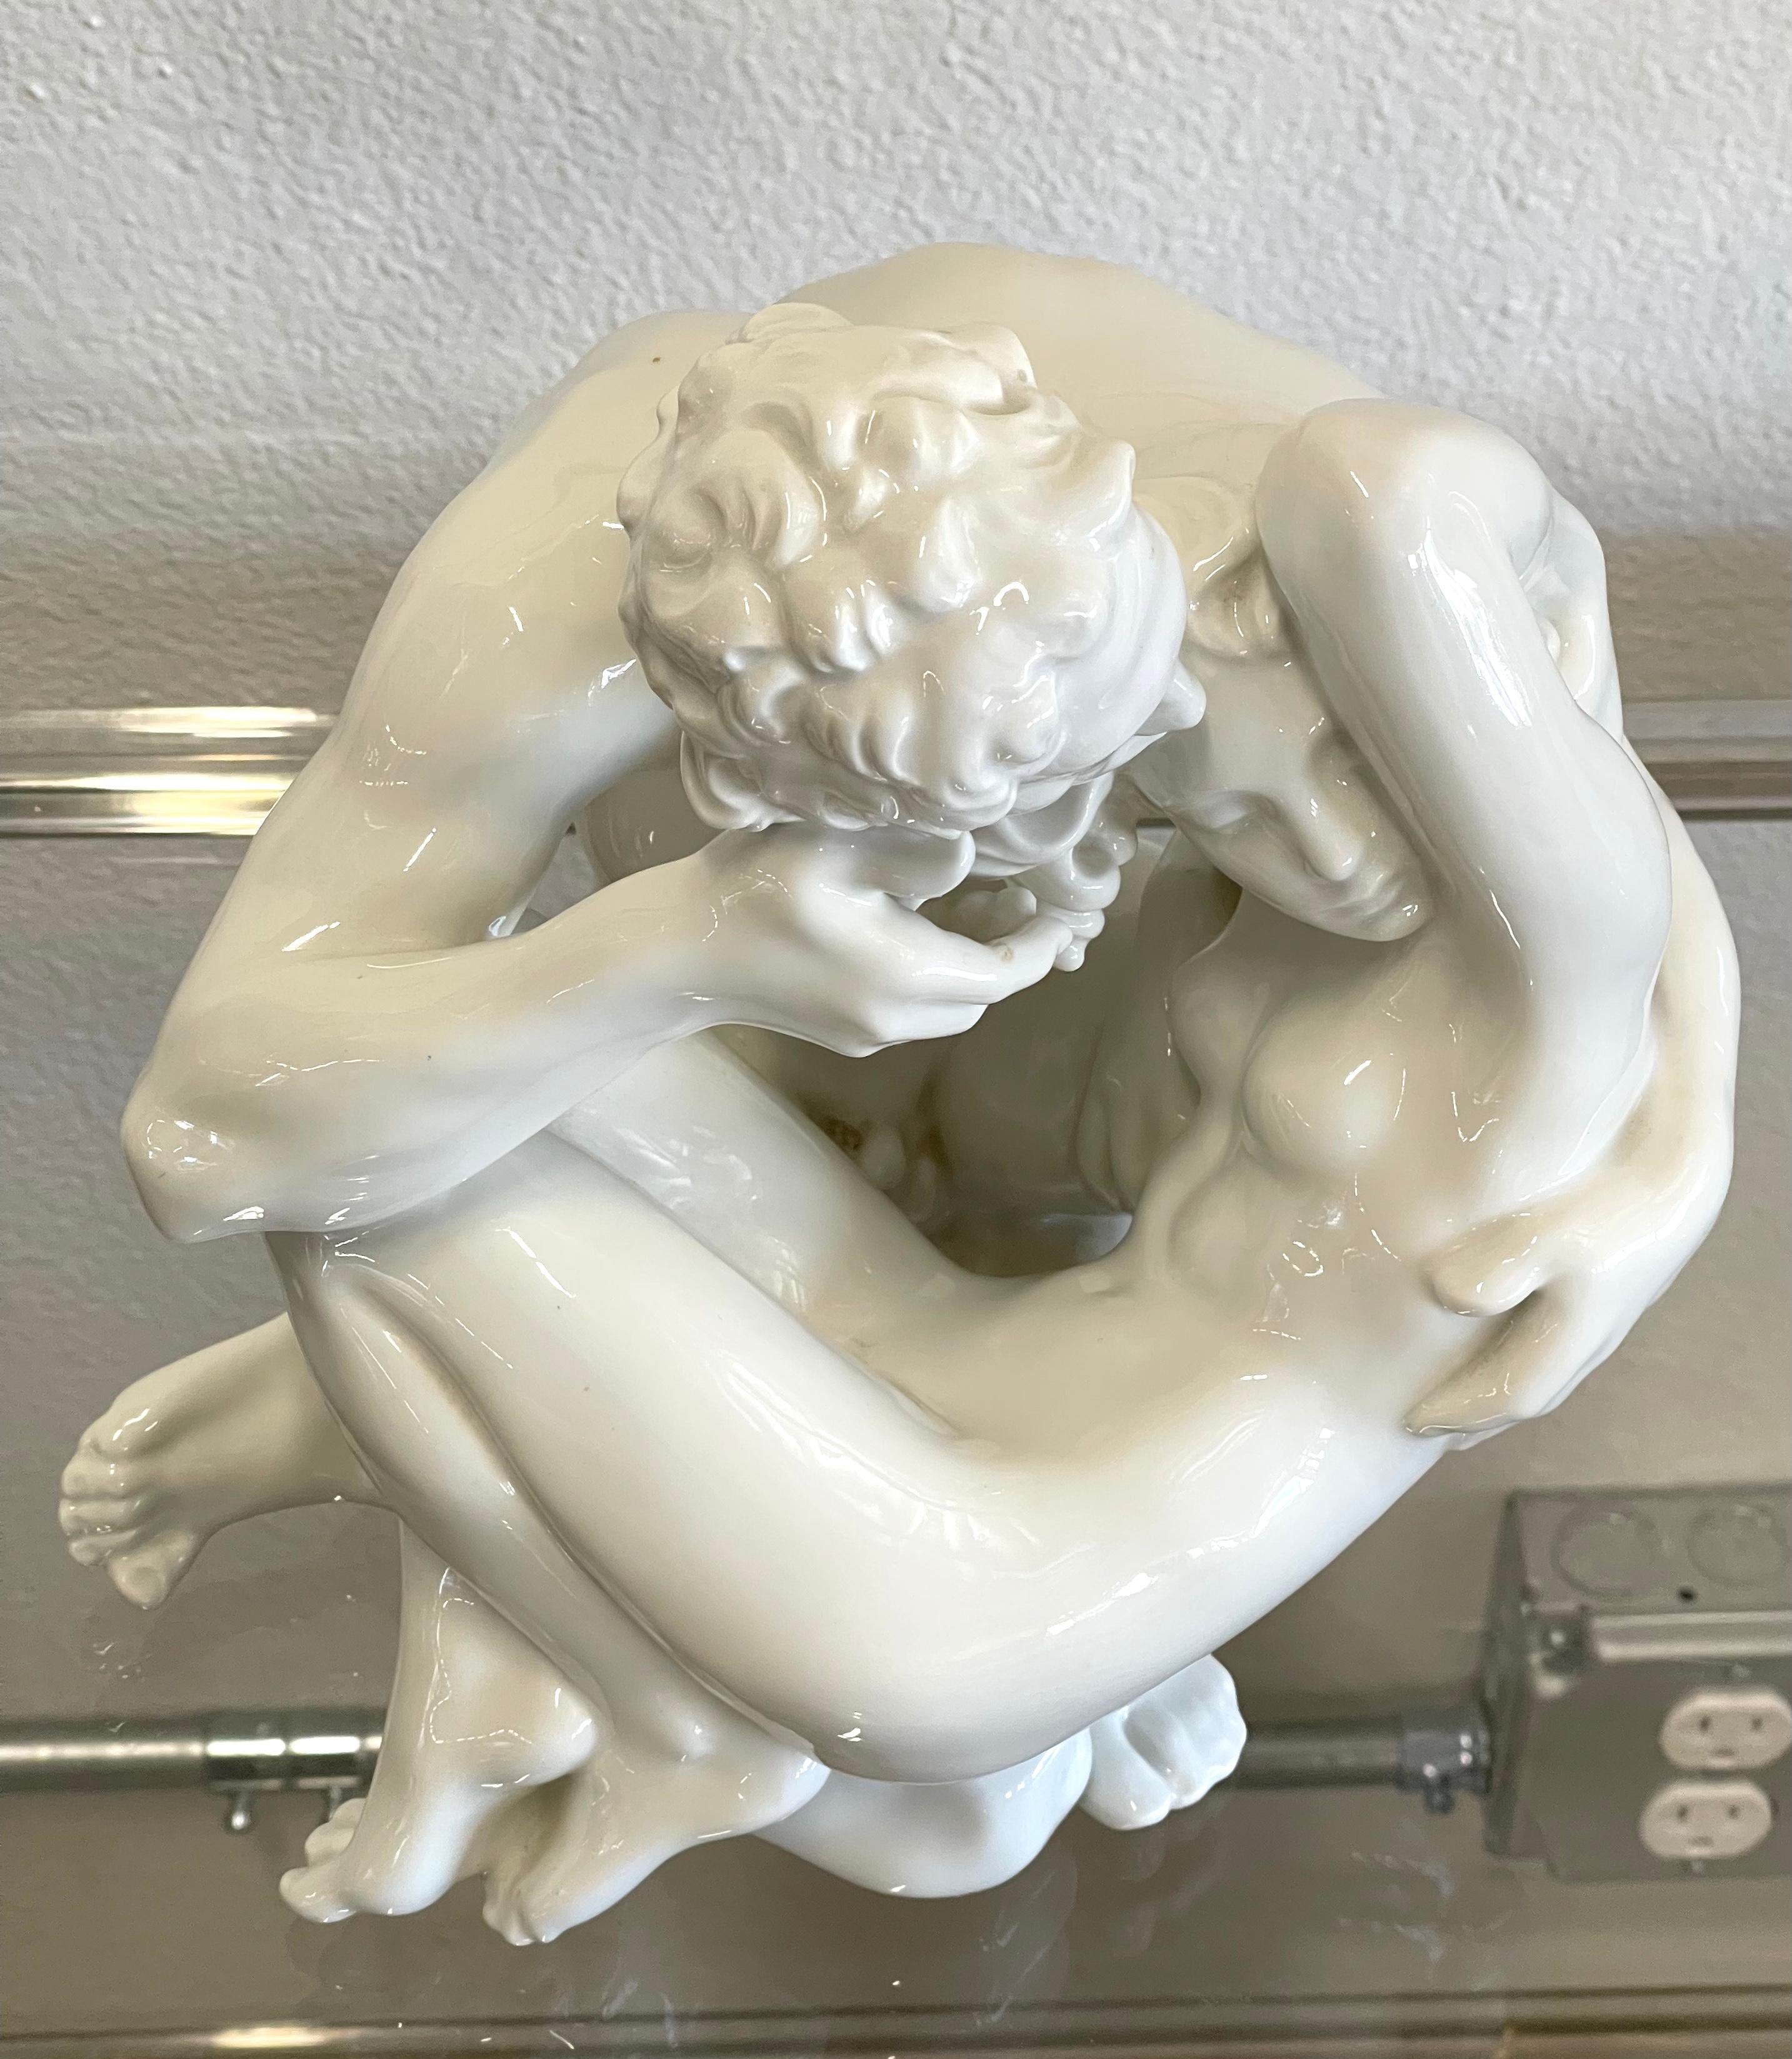 Wonderful sculpture by Dahl Jensen of an embracing couple. Large size version. Numbered 1184 and signed on the base. Impressed DJ as well. In excellent condition. 10 inches tall.